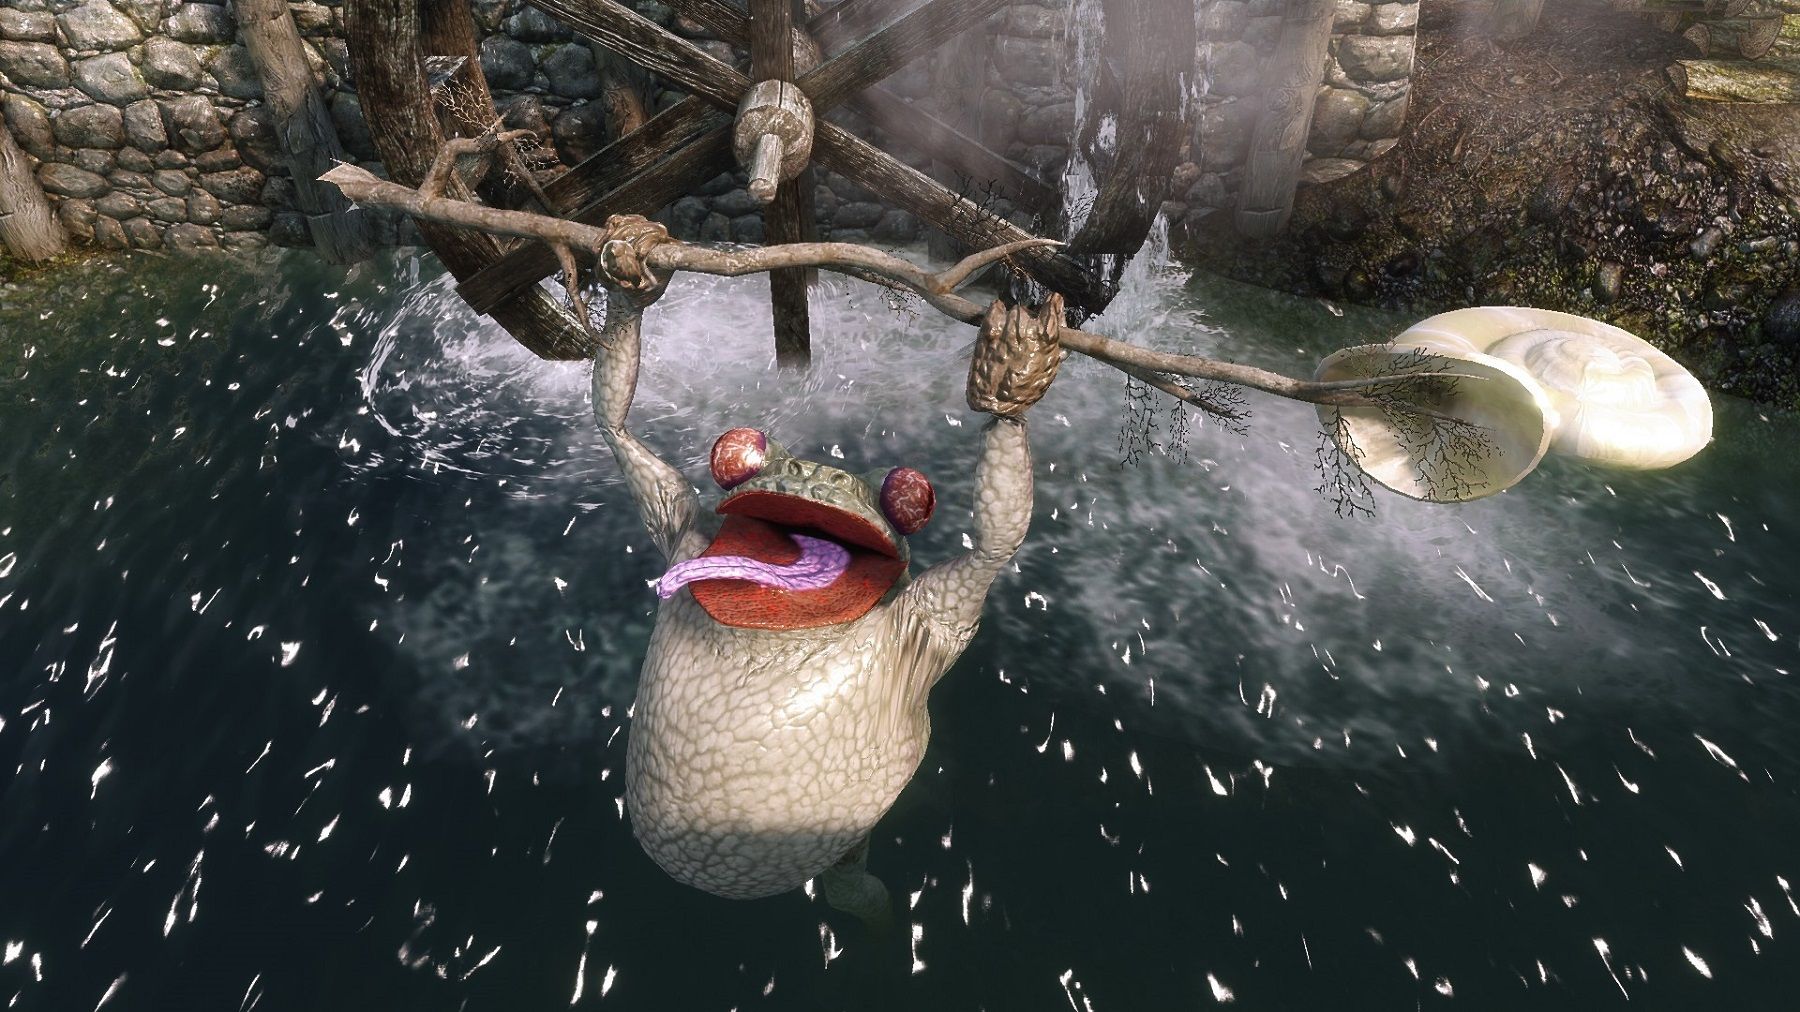 Image from Skyrim showing a giant frog in a river.